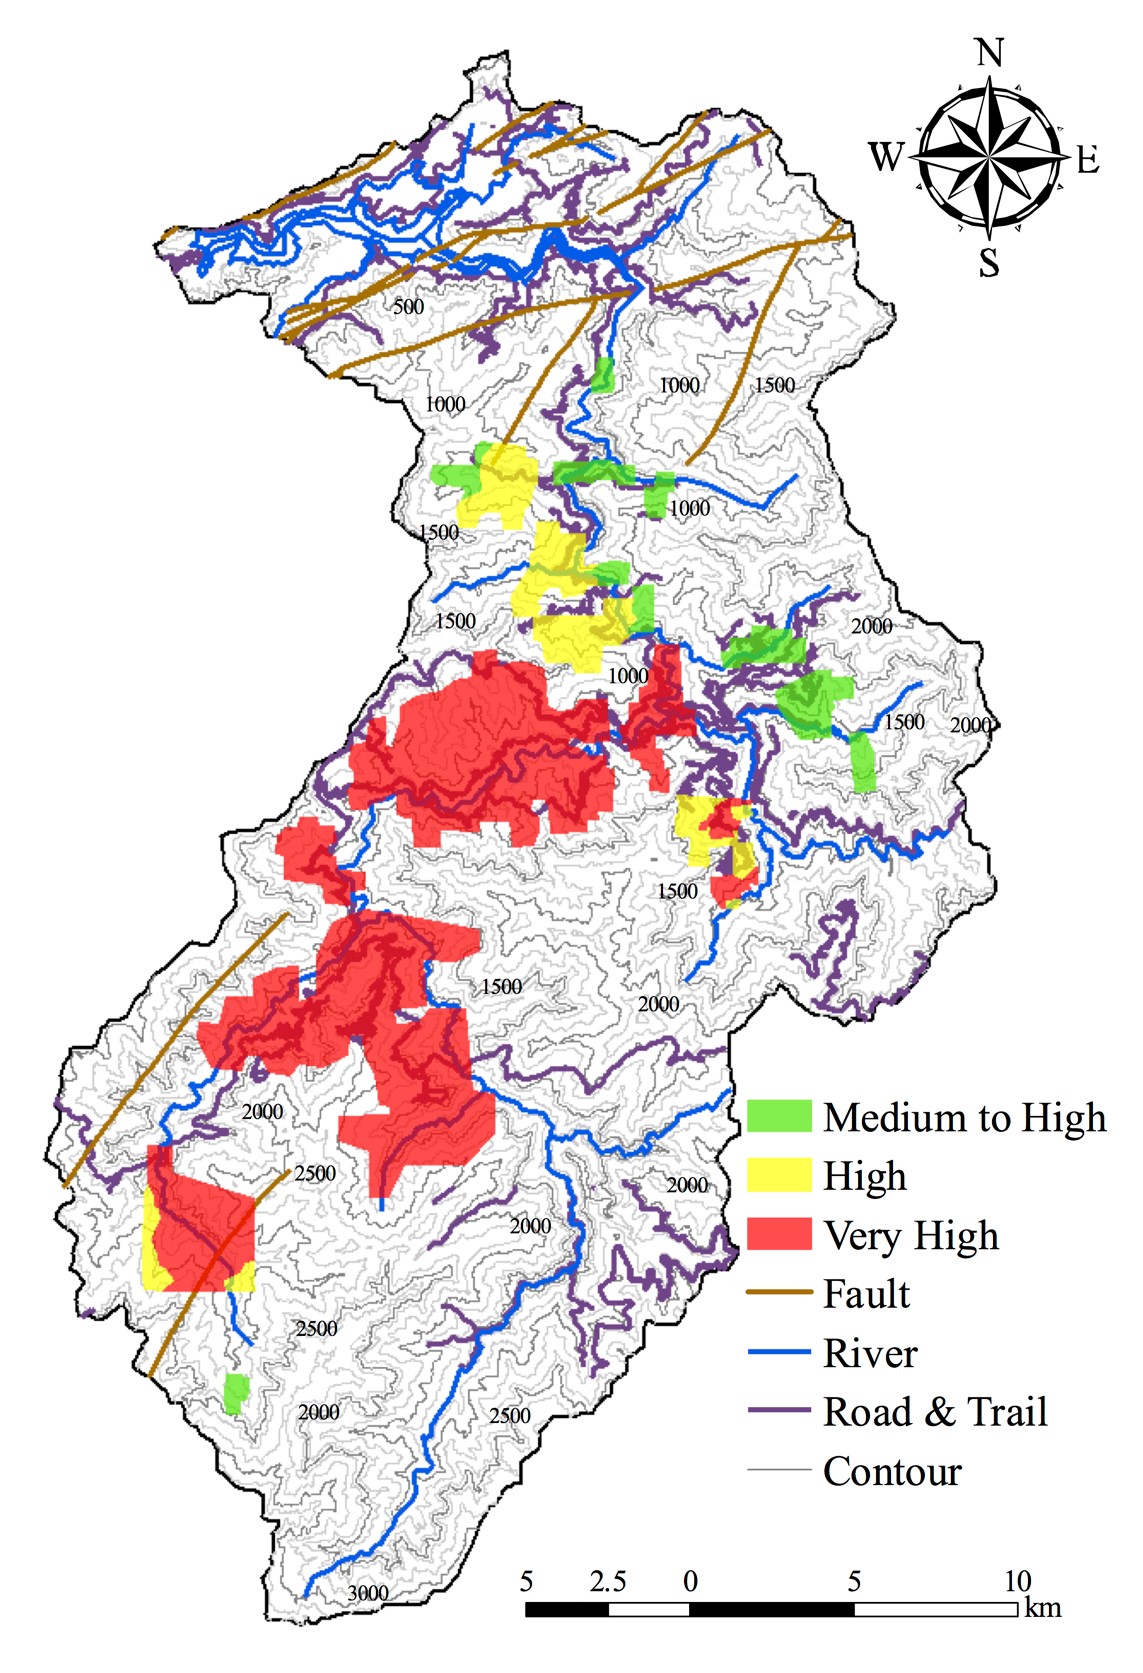 Fig. 1: Landslide susceptibility map of Shimen Watershed produced from remote sensing and spatial analysis.